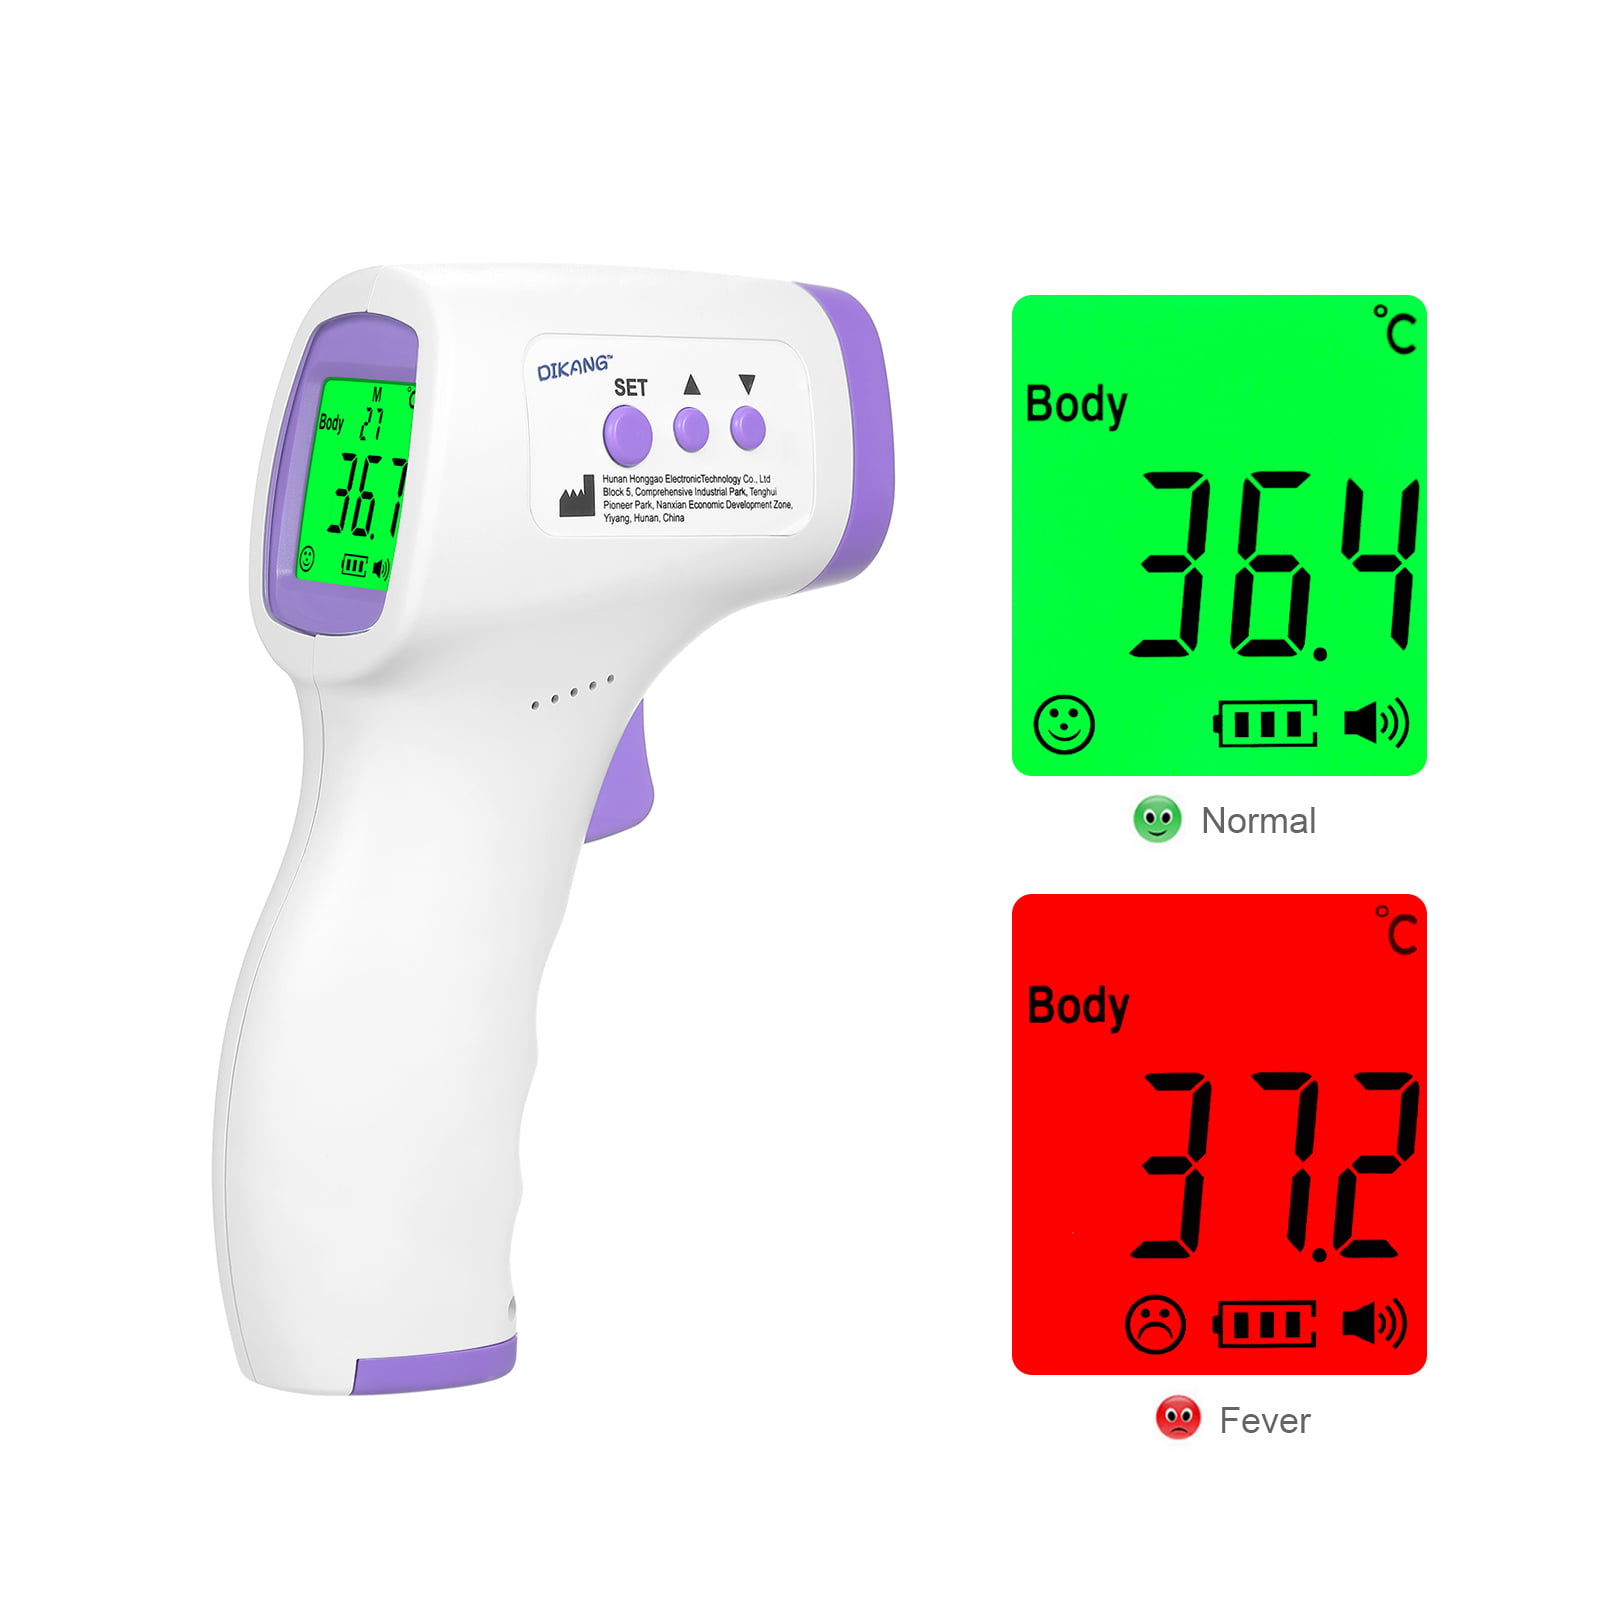 Stable and Instant Reading Thermometer for Fever Digital Thermometer with 3 Color Back Light Alarm and 10 Reading Storage for Baby and Adult Use